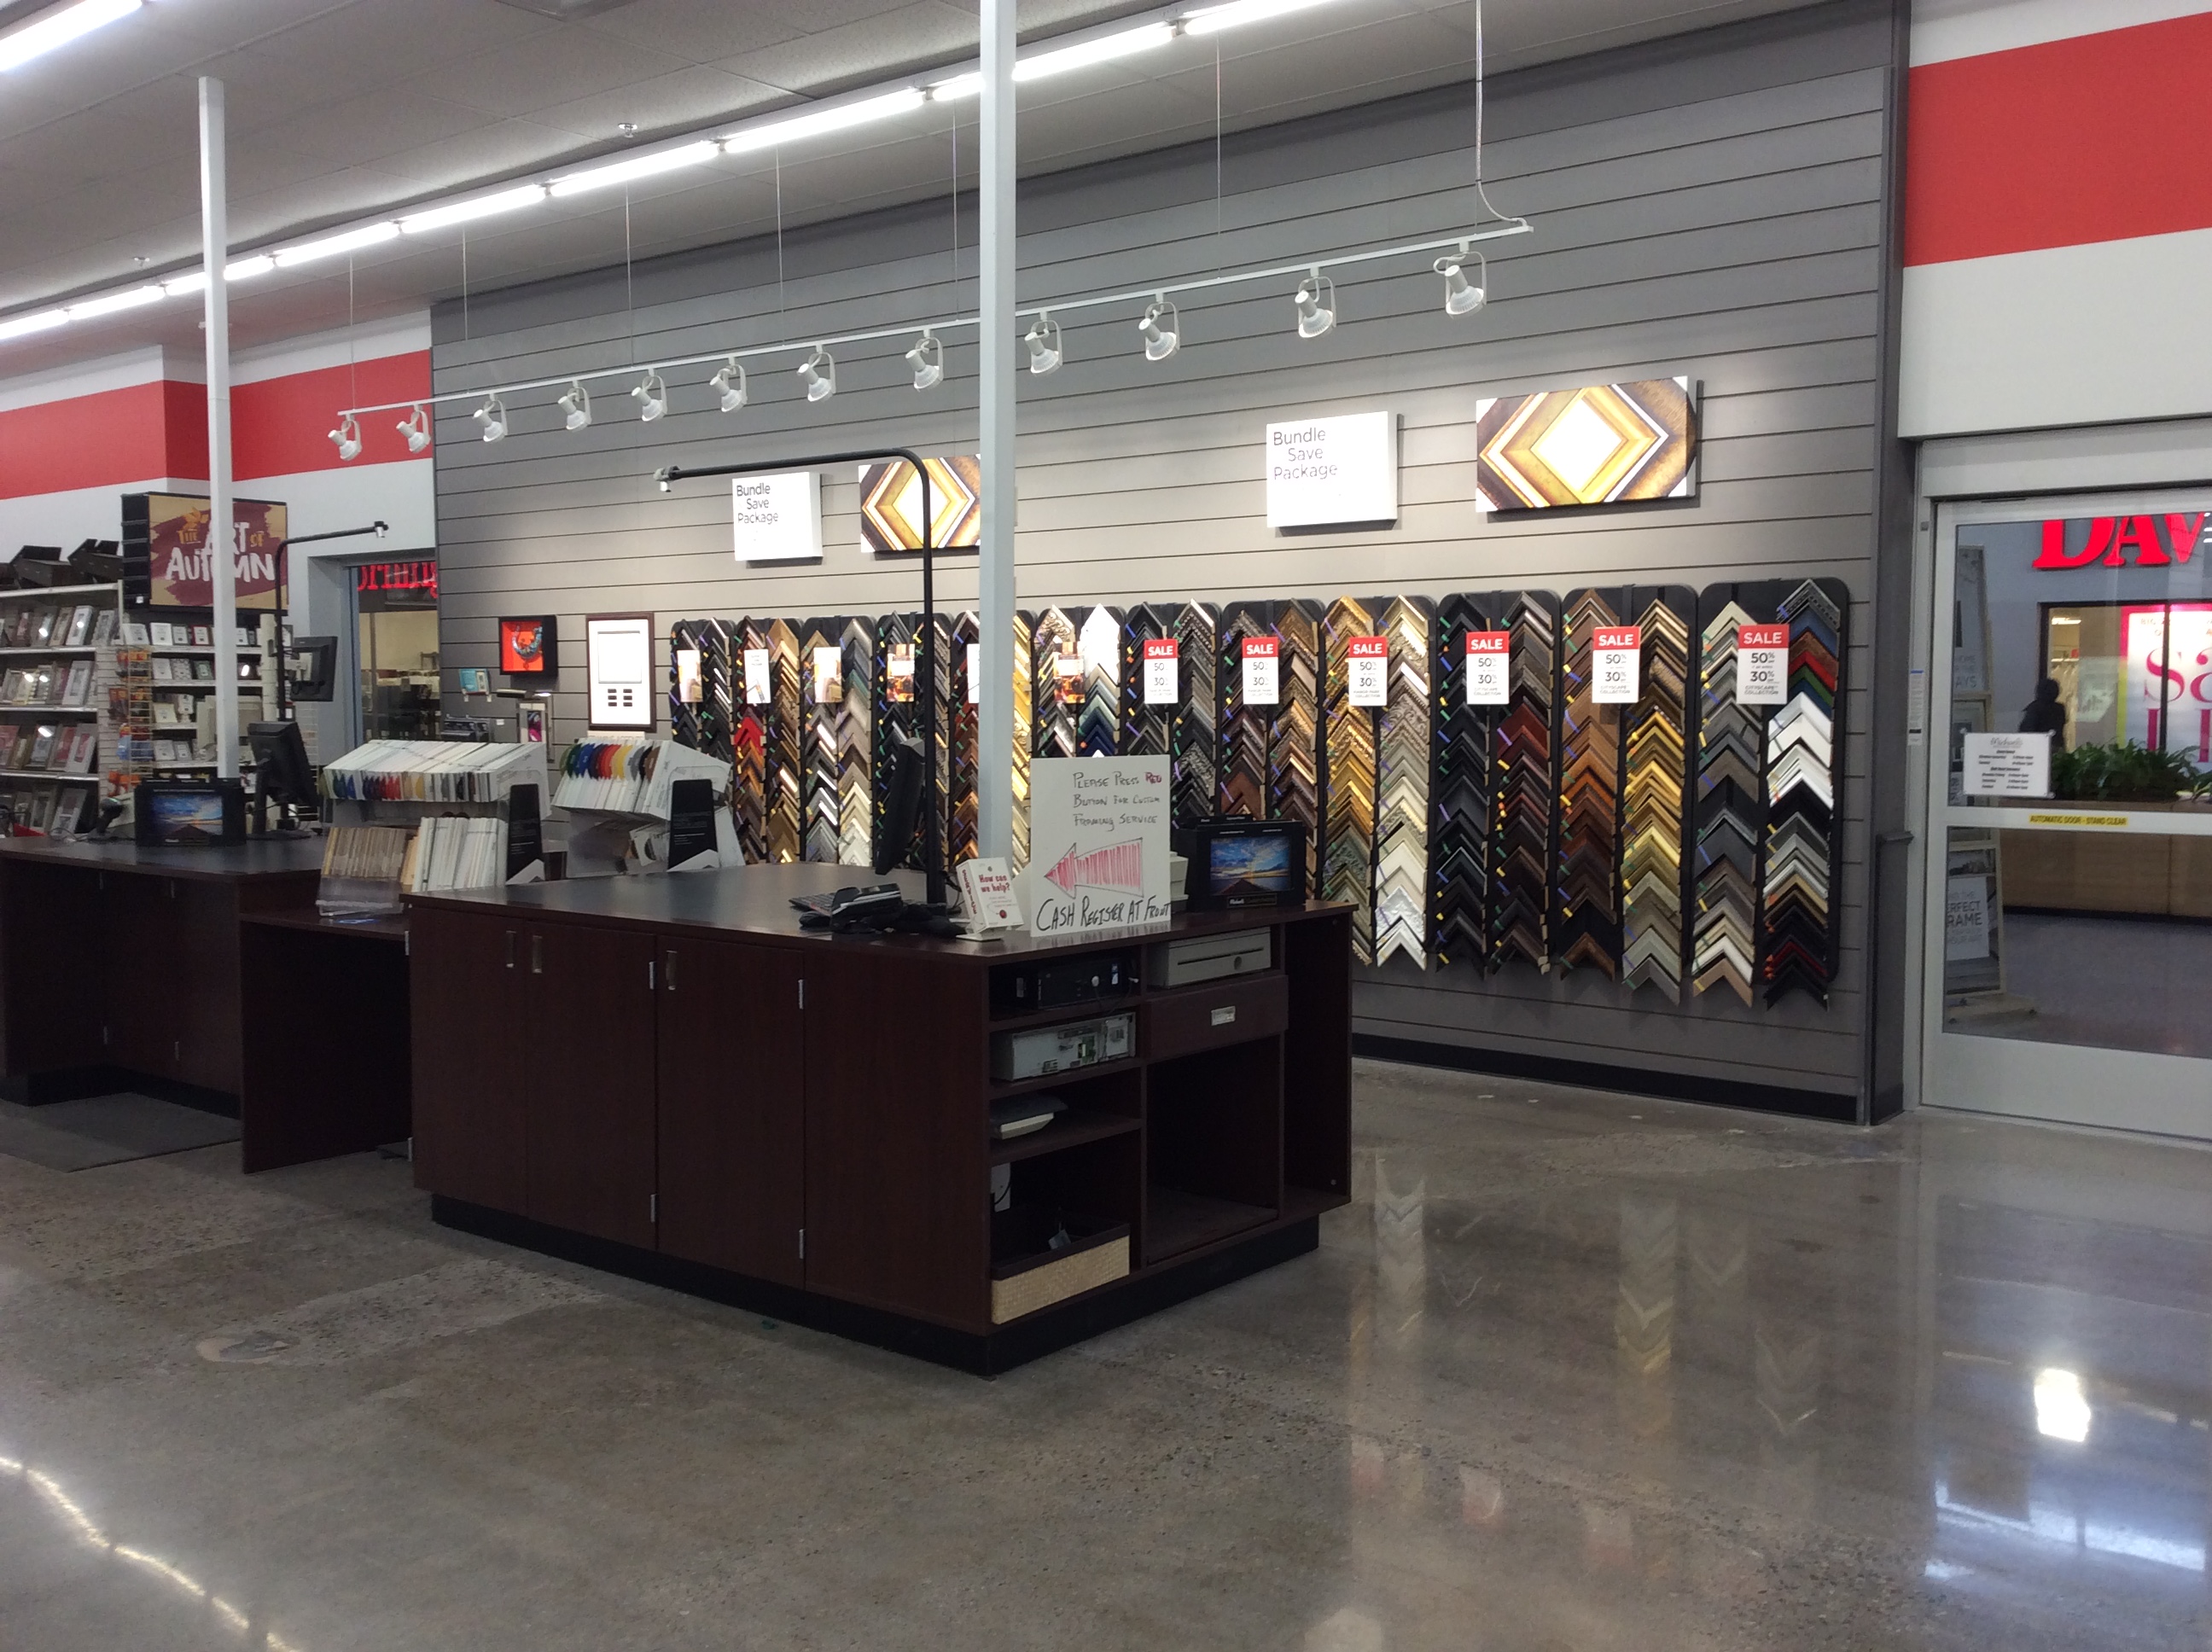 Michaels in Roseville, MN store remodel & expansion by Westwood Contractors